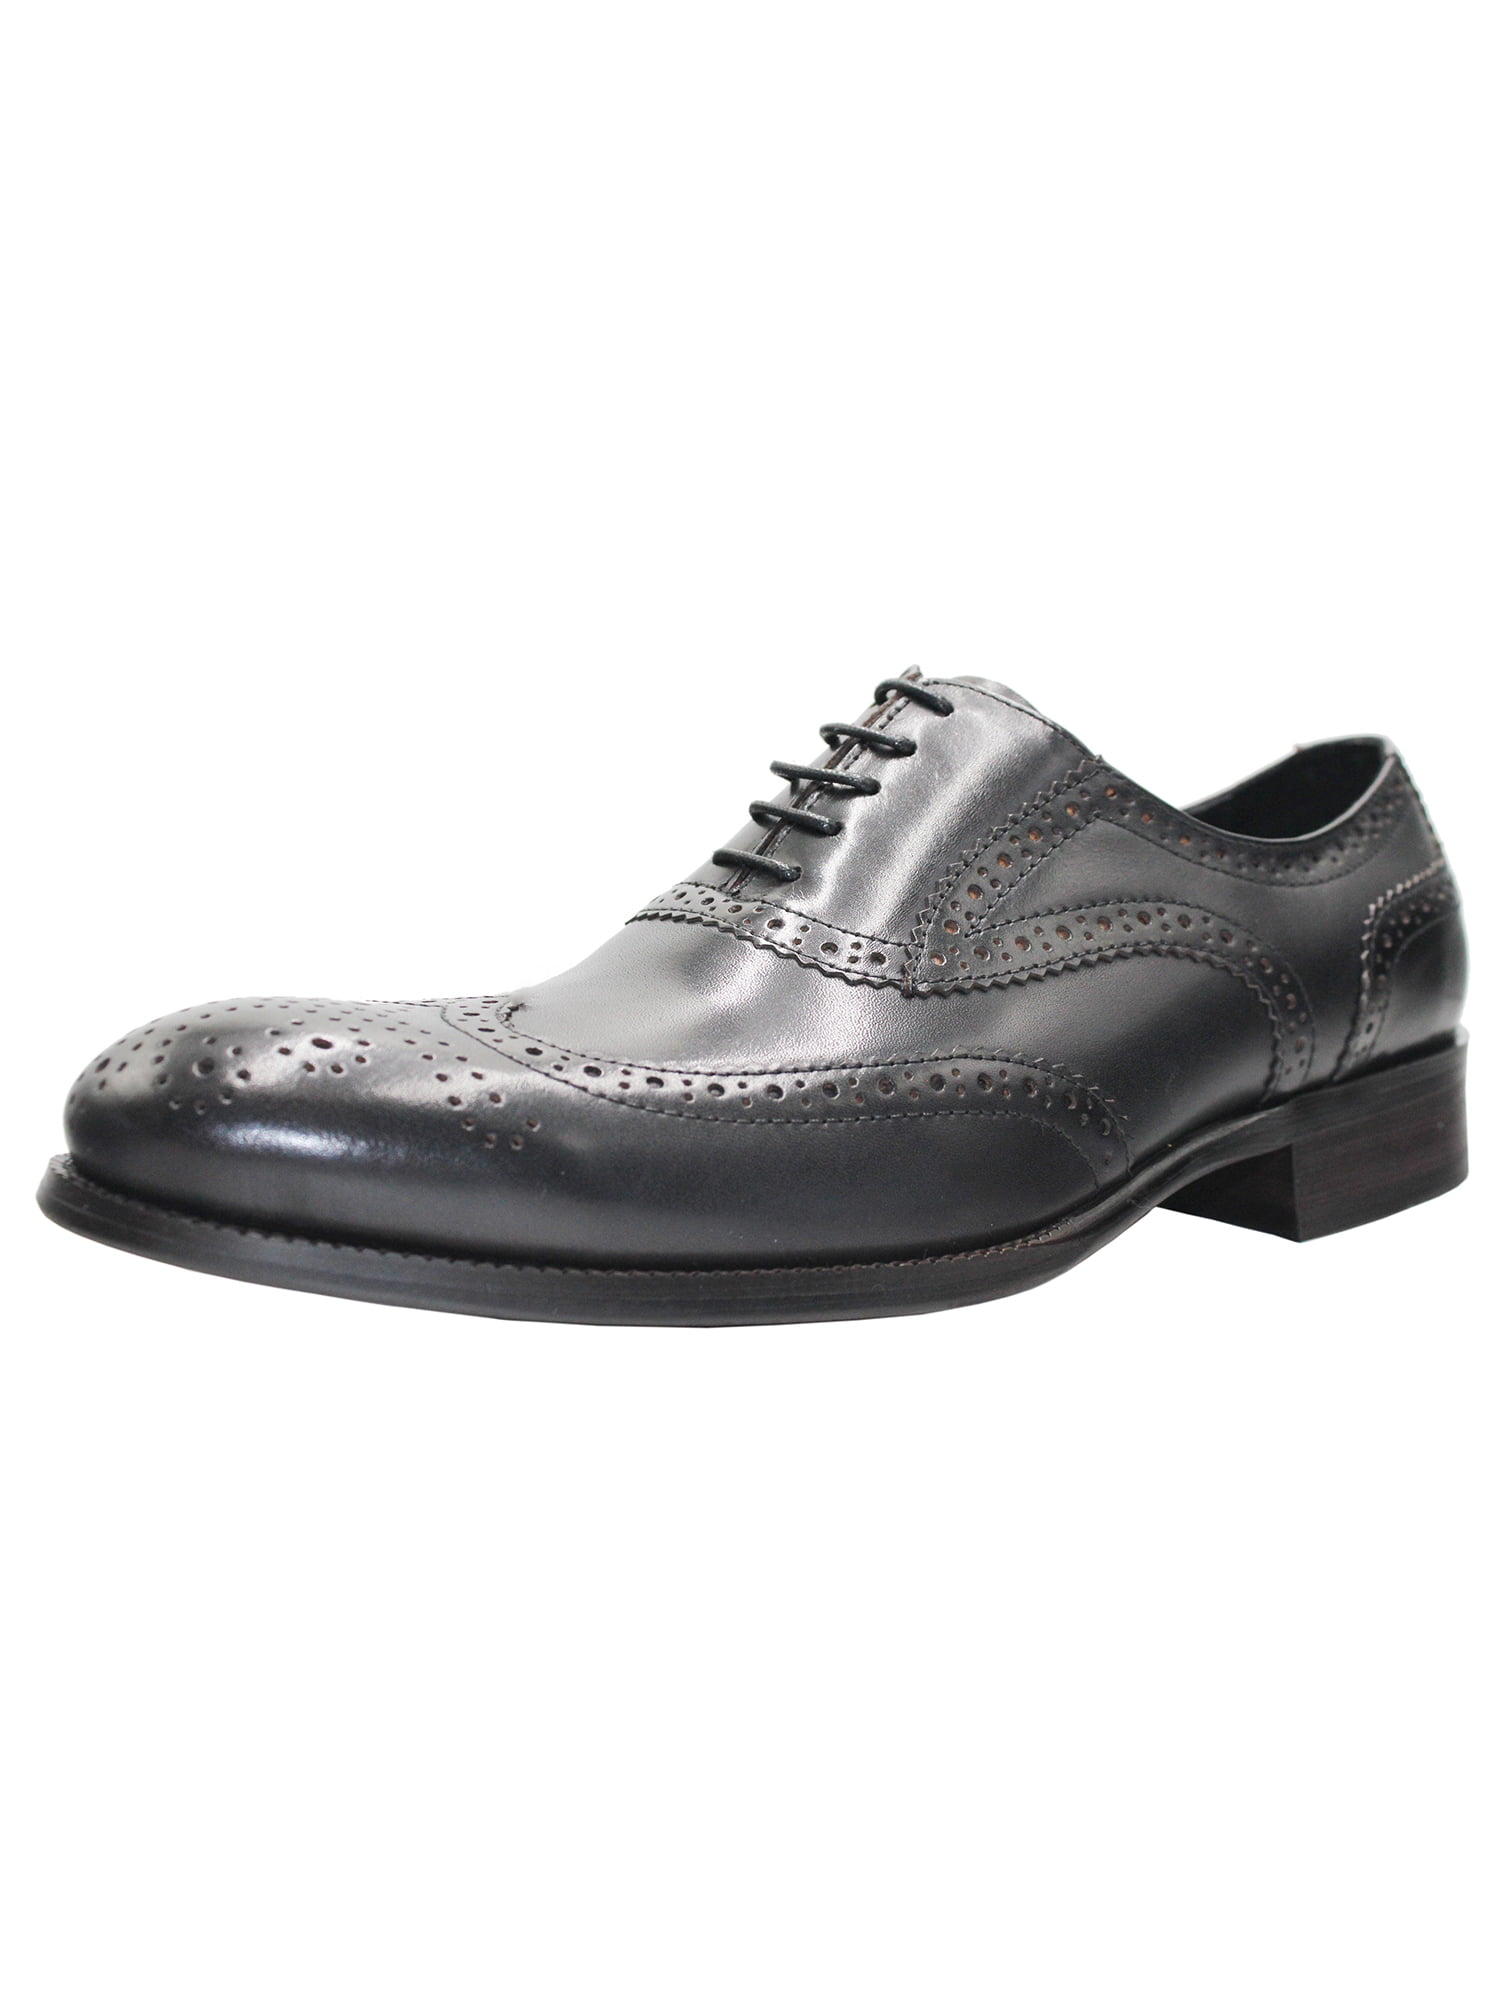 New Men's Black & Grey Wing Tip Oxford Dress Shoes Formal Holiday Gift Lace Up 